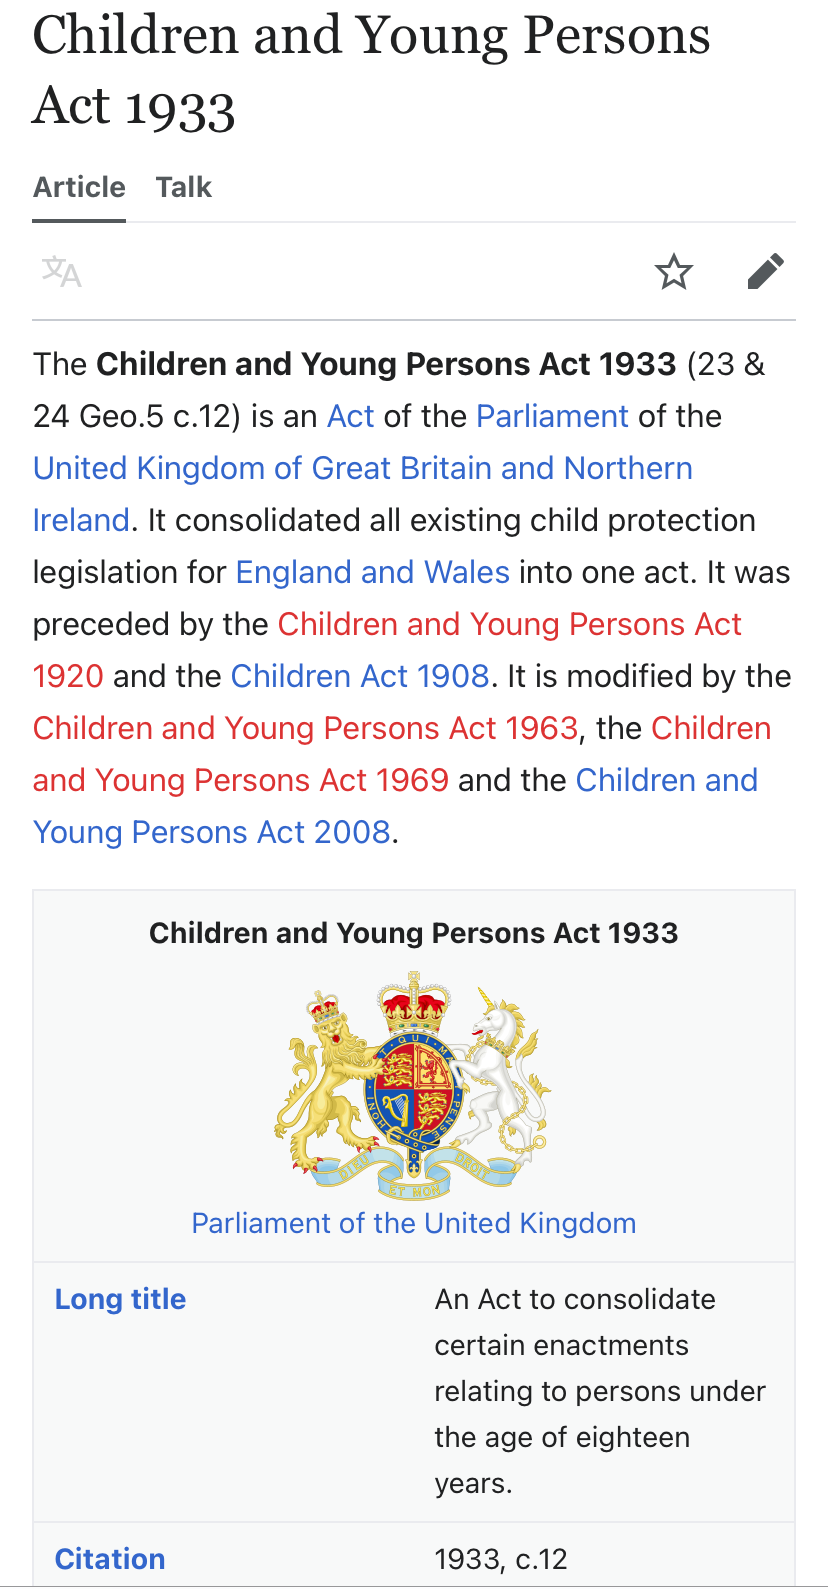 High Quality Children and Young Persons Act 1933 Blank Meme Template